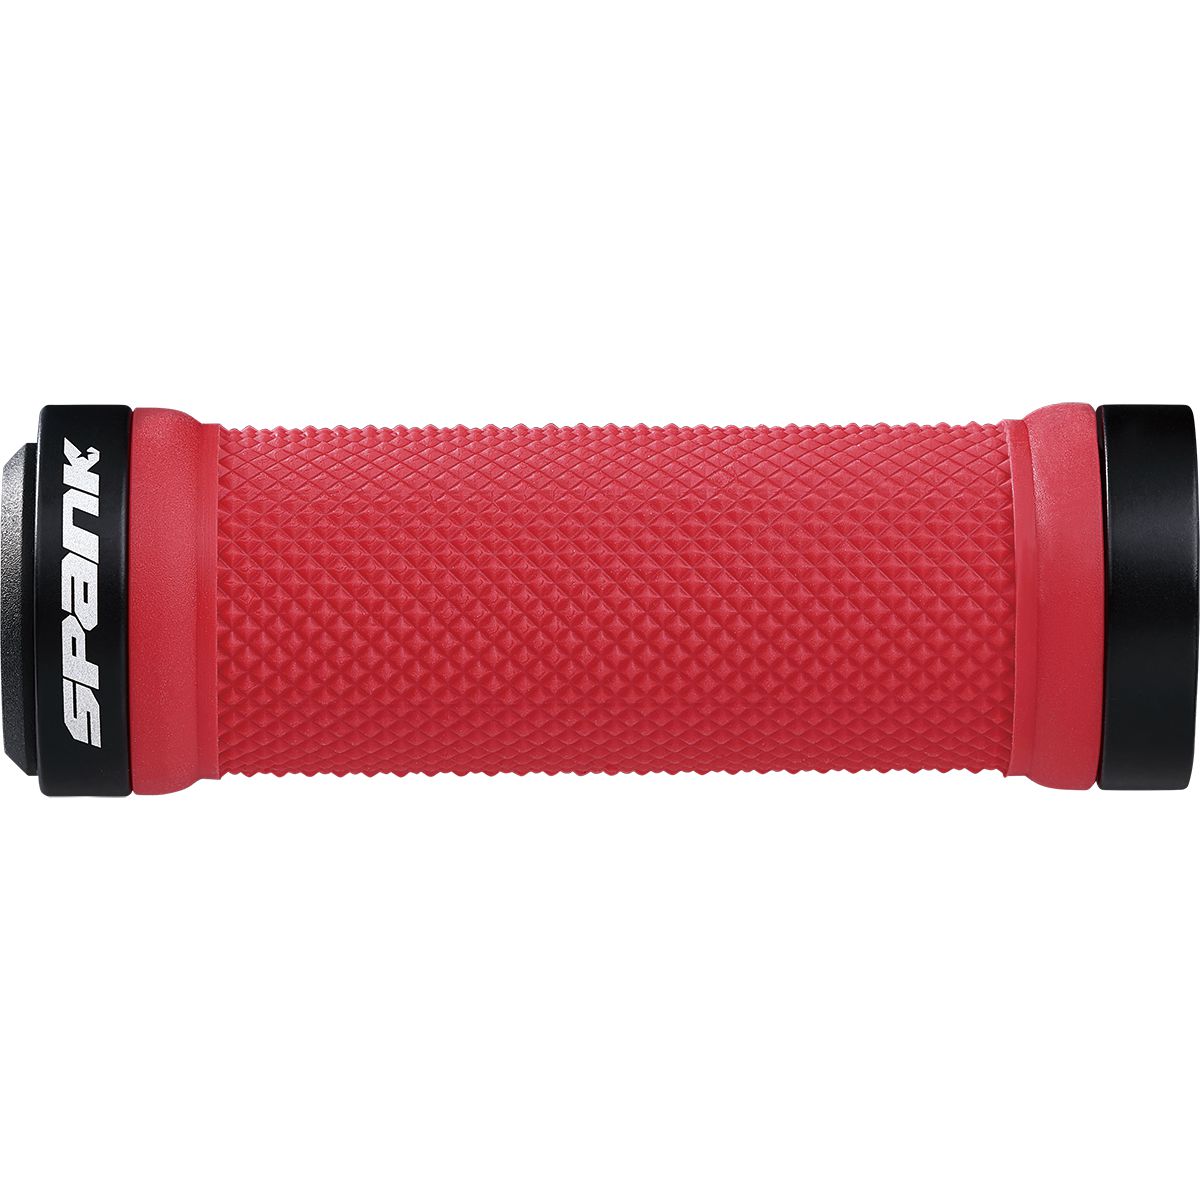 Spank SPANK SPOON Grom Grips - Grips - Bicycle Warehouse